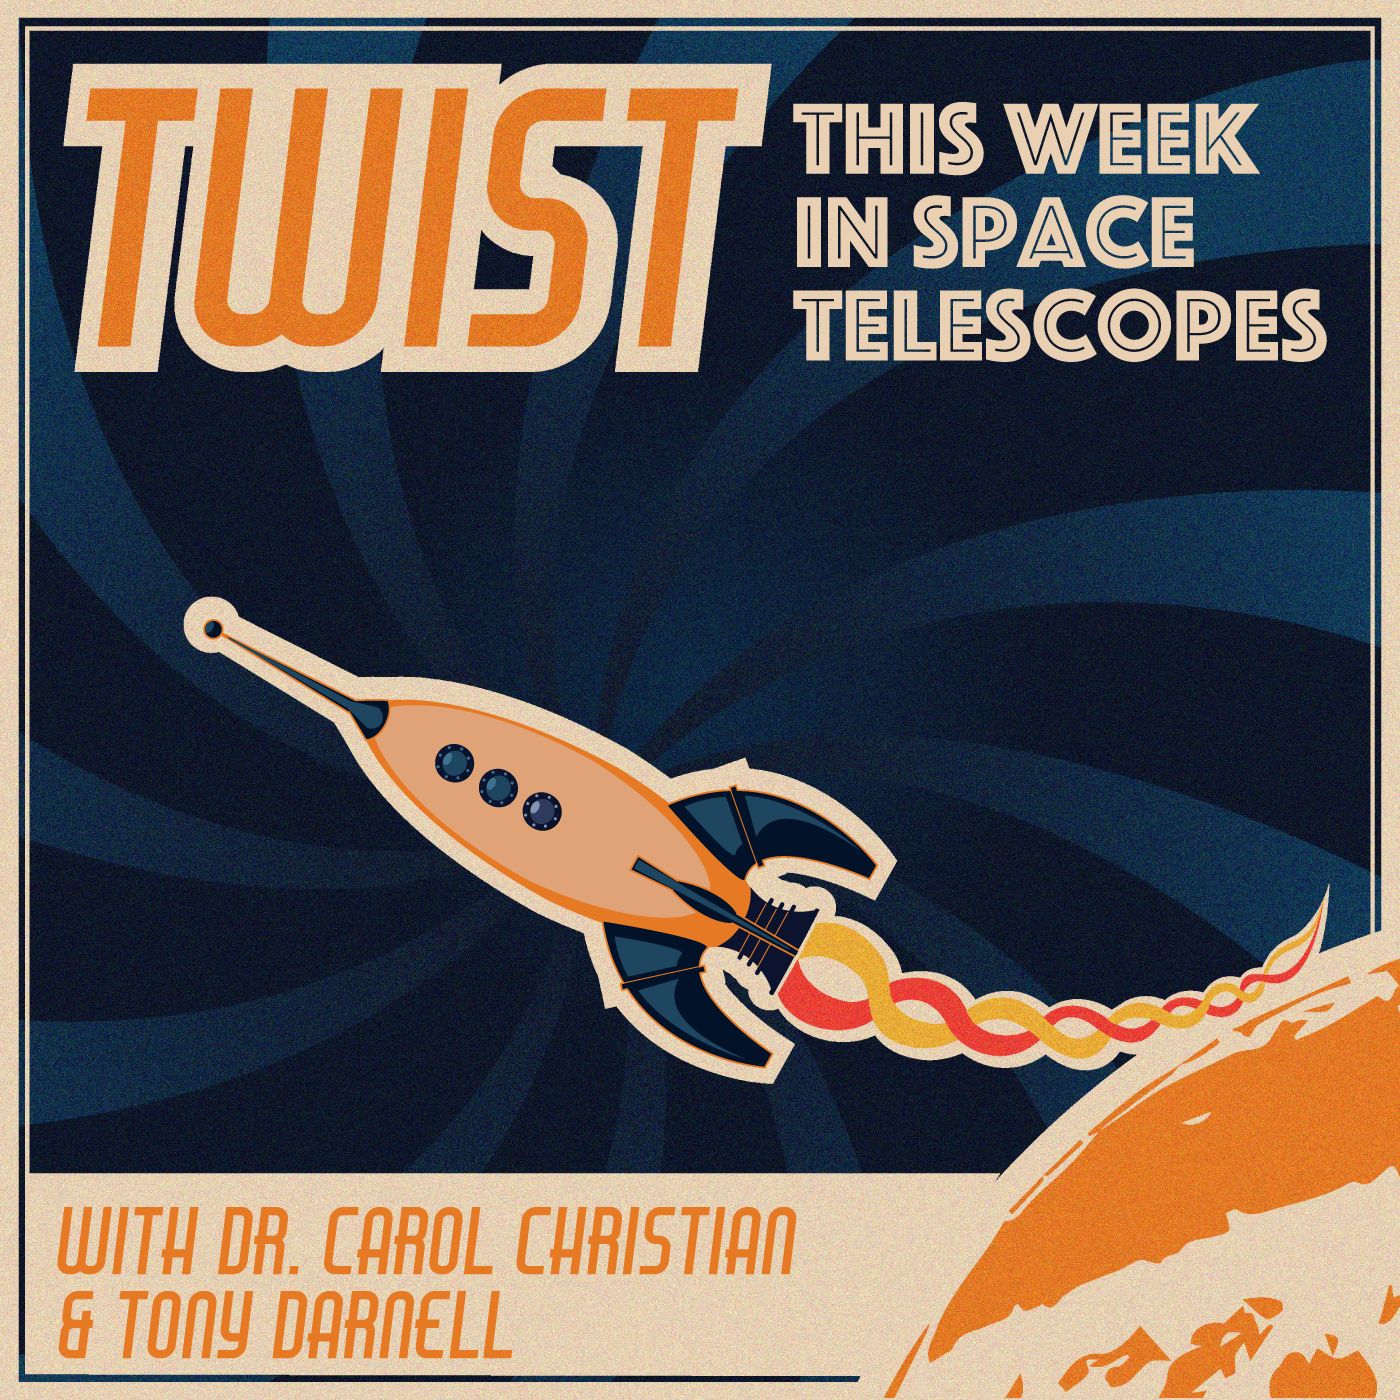 This Week in Space Telescopes